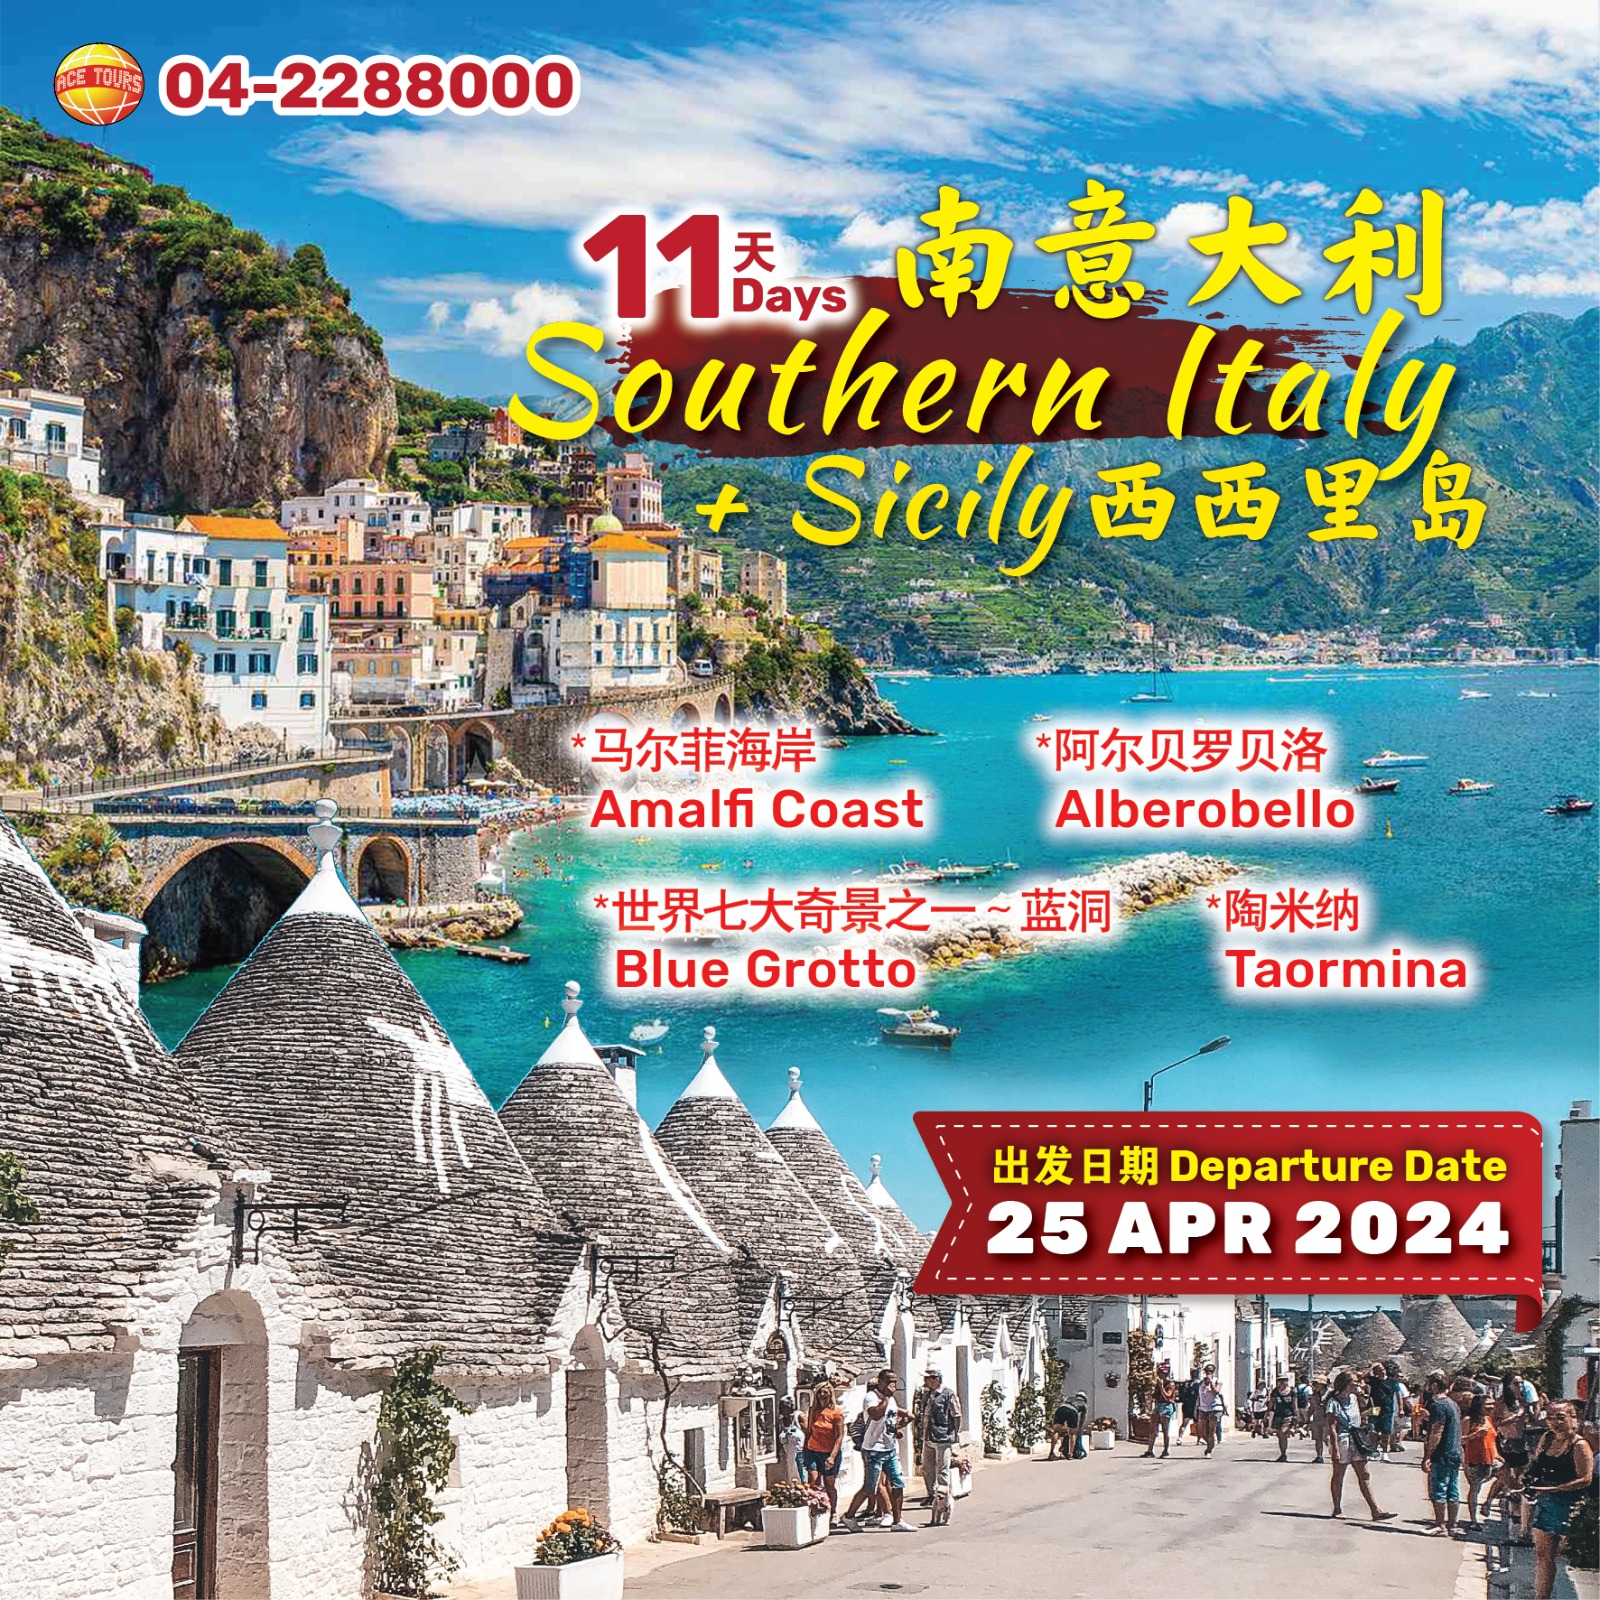 11 Days Southern Italy